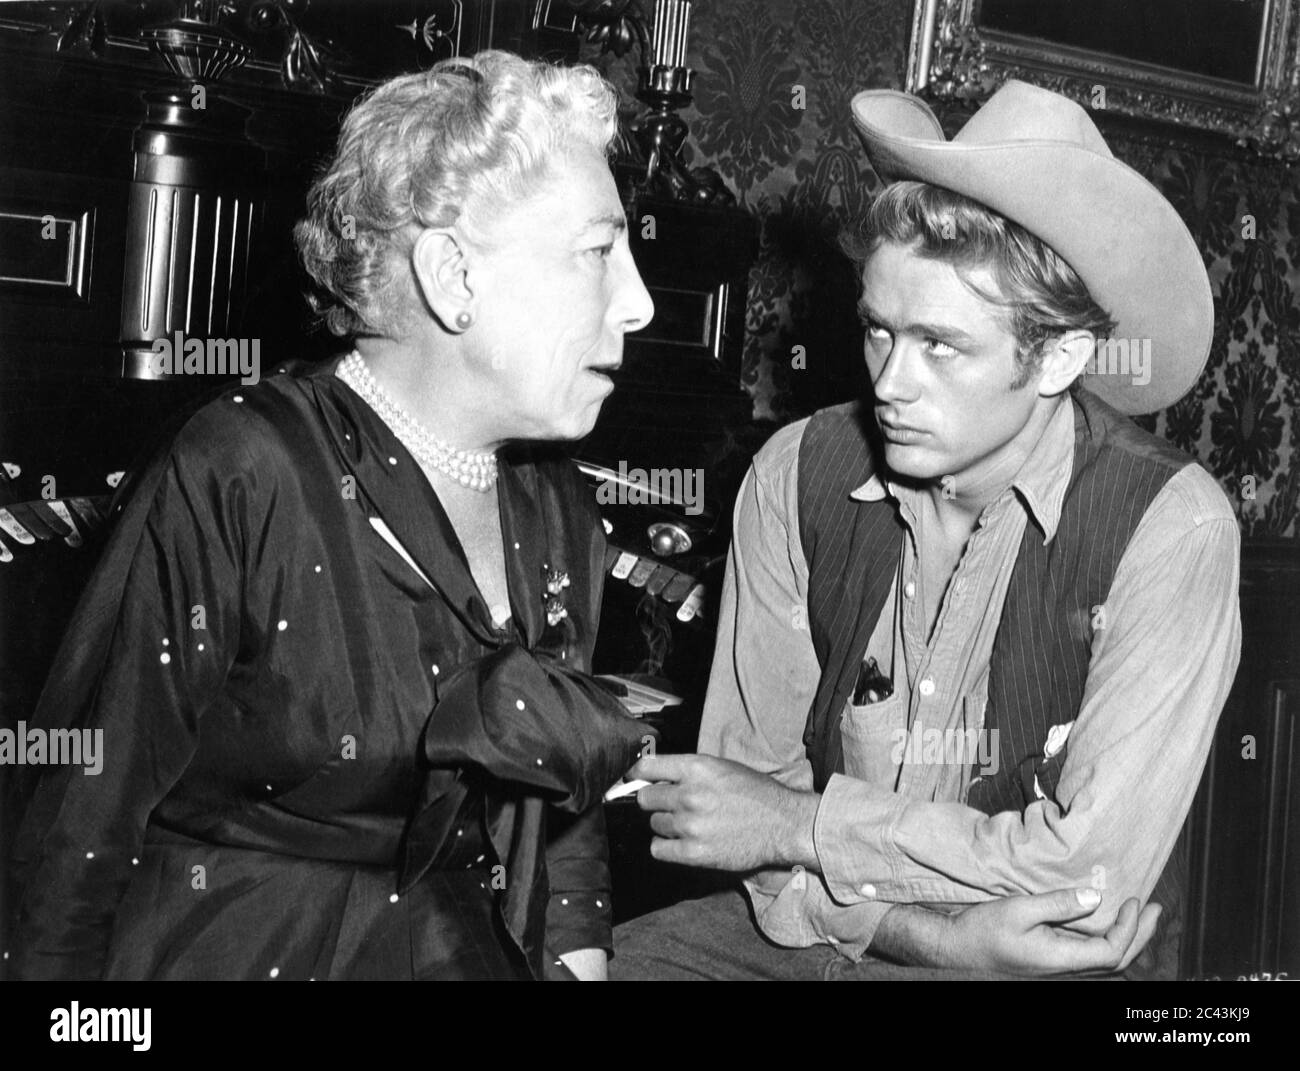 JAMES DEAN and author EDNA FERBER on set candid during the filming of GIANT 1956 director GEORGE STEVENS novel Edna Ferber George Stevens Productions / Warner Bros. Stock Photo